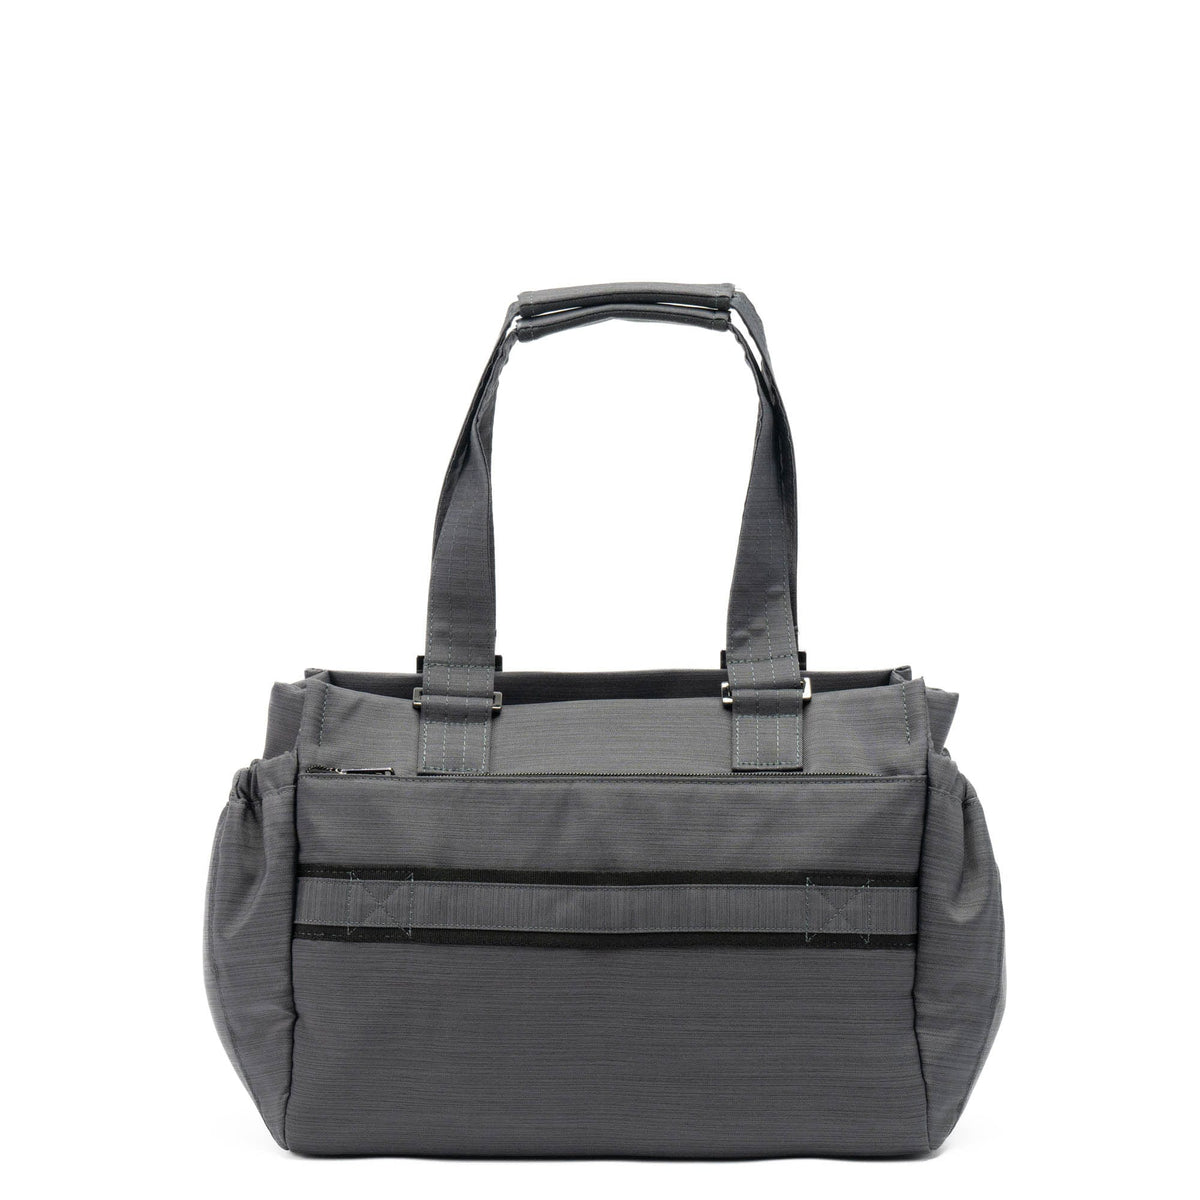 Dilly Dally Convertible Tote Bag